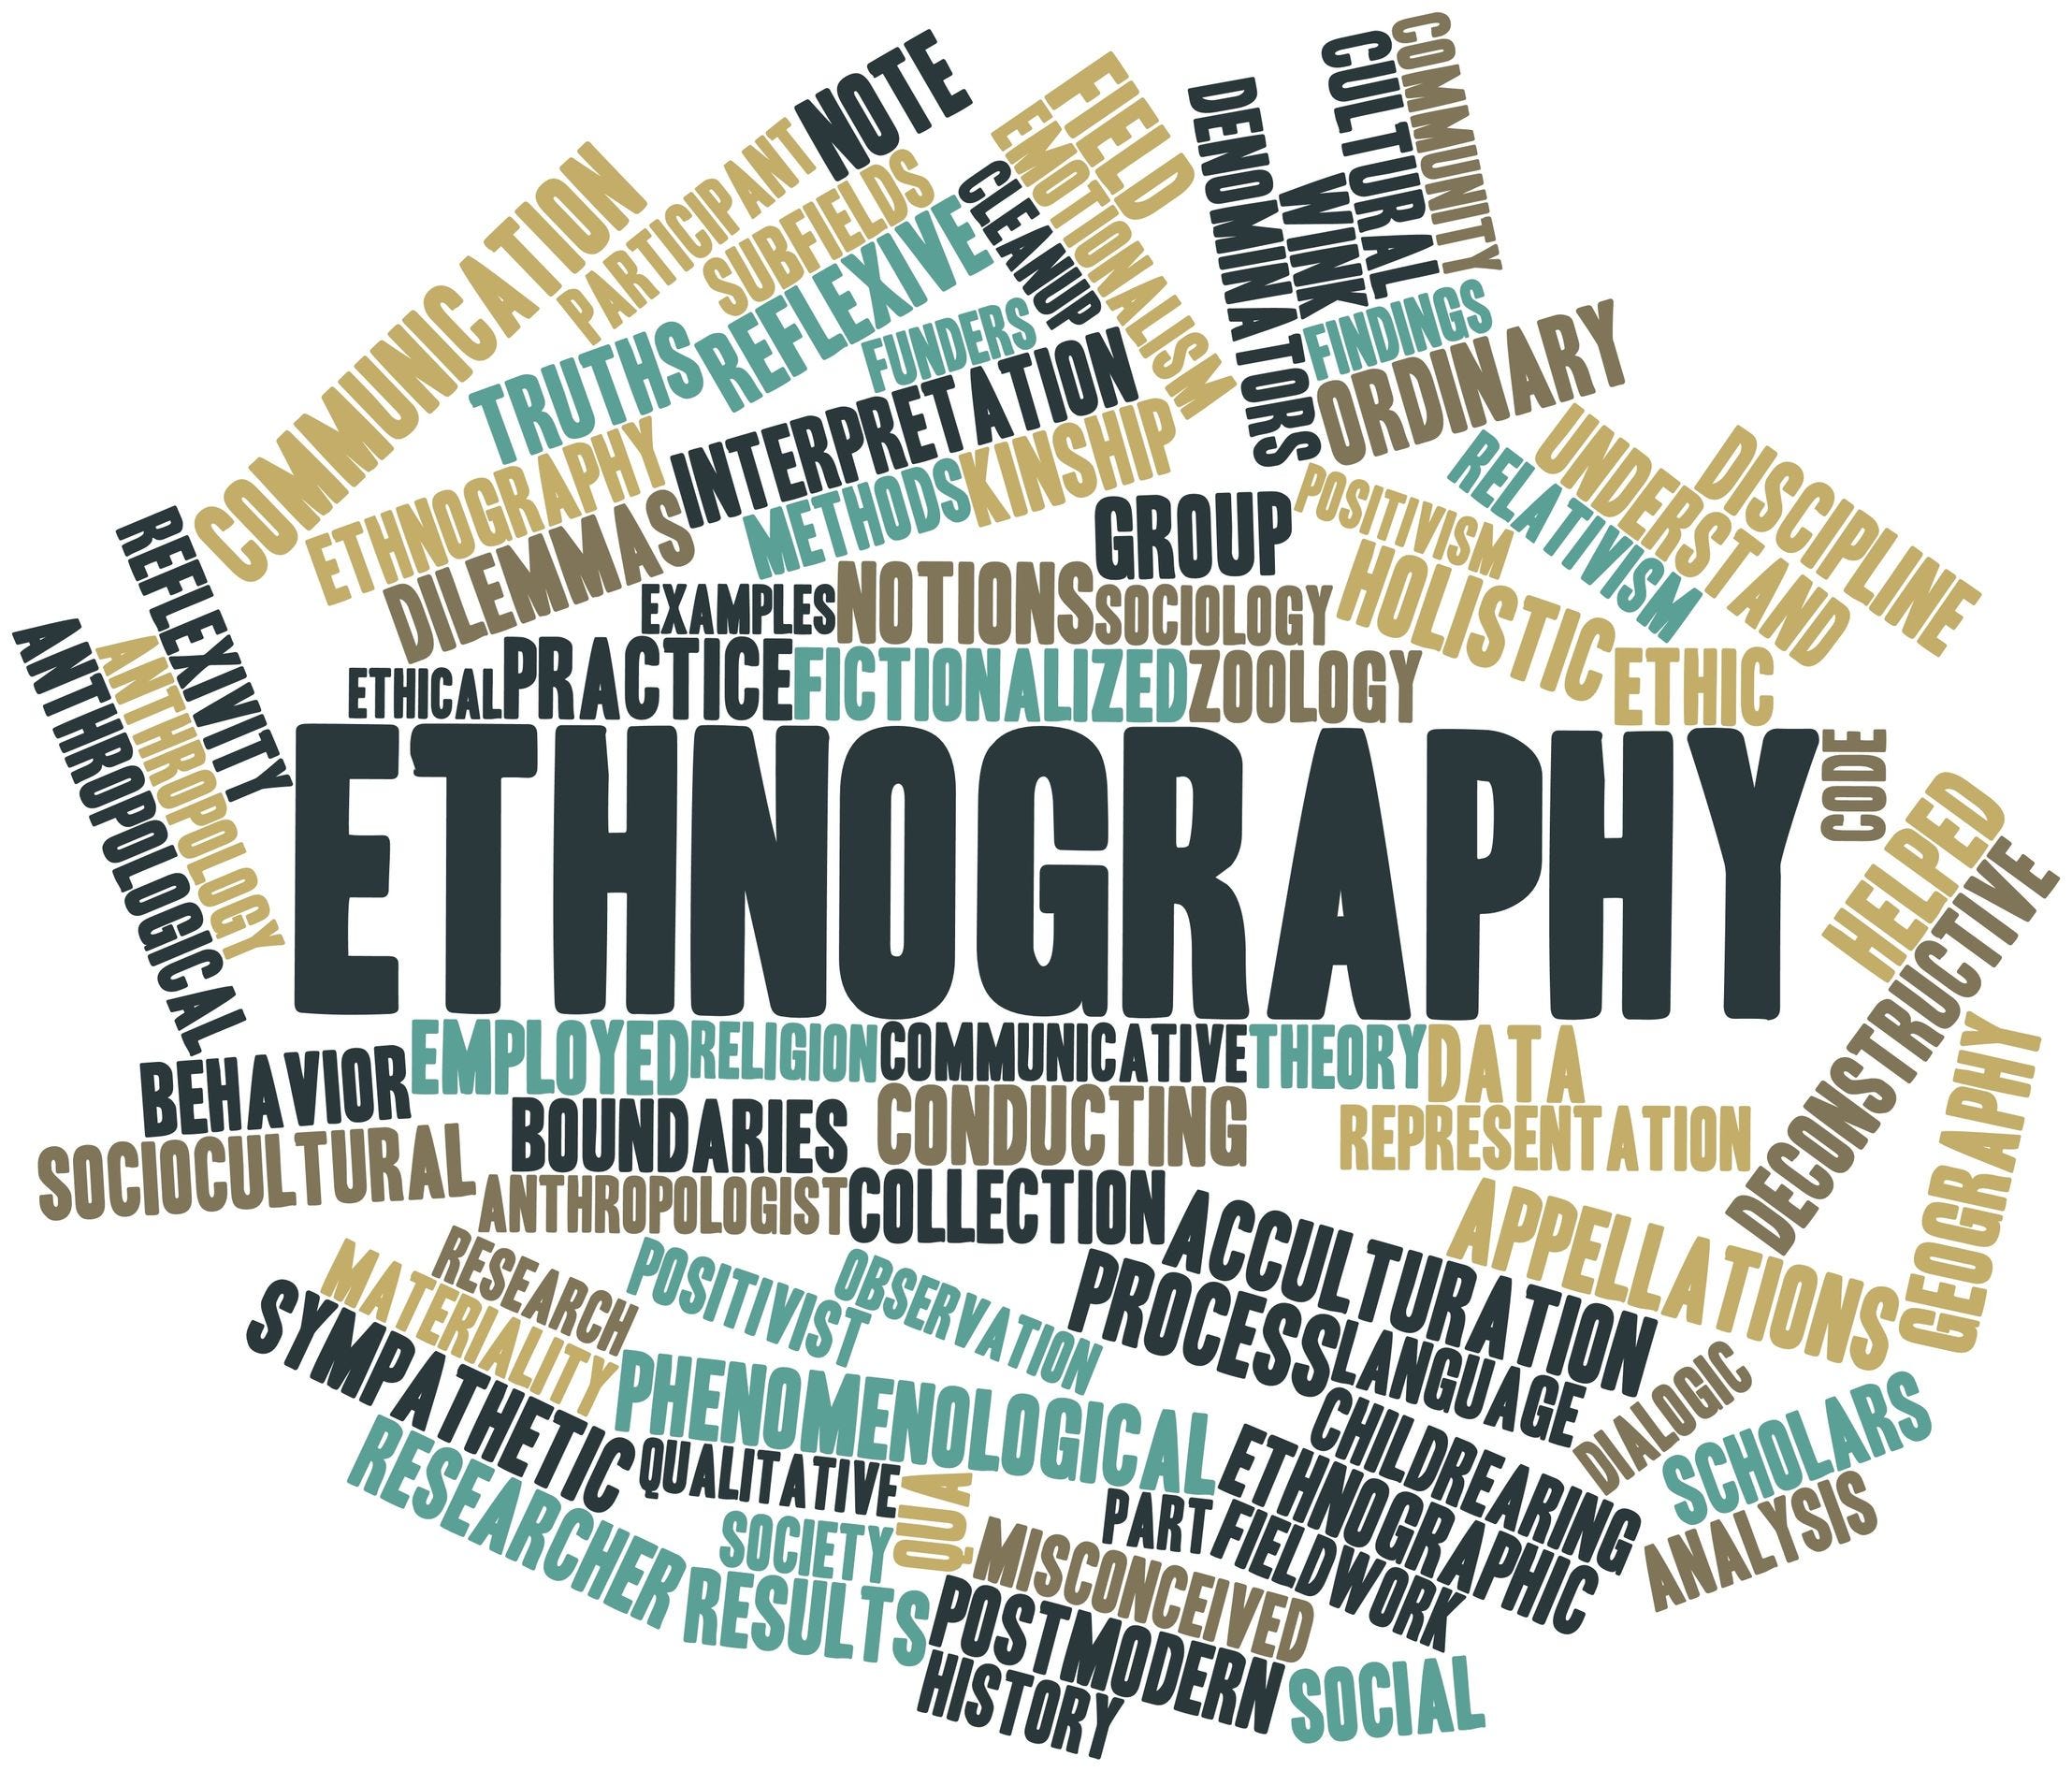 ethnography medical education research